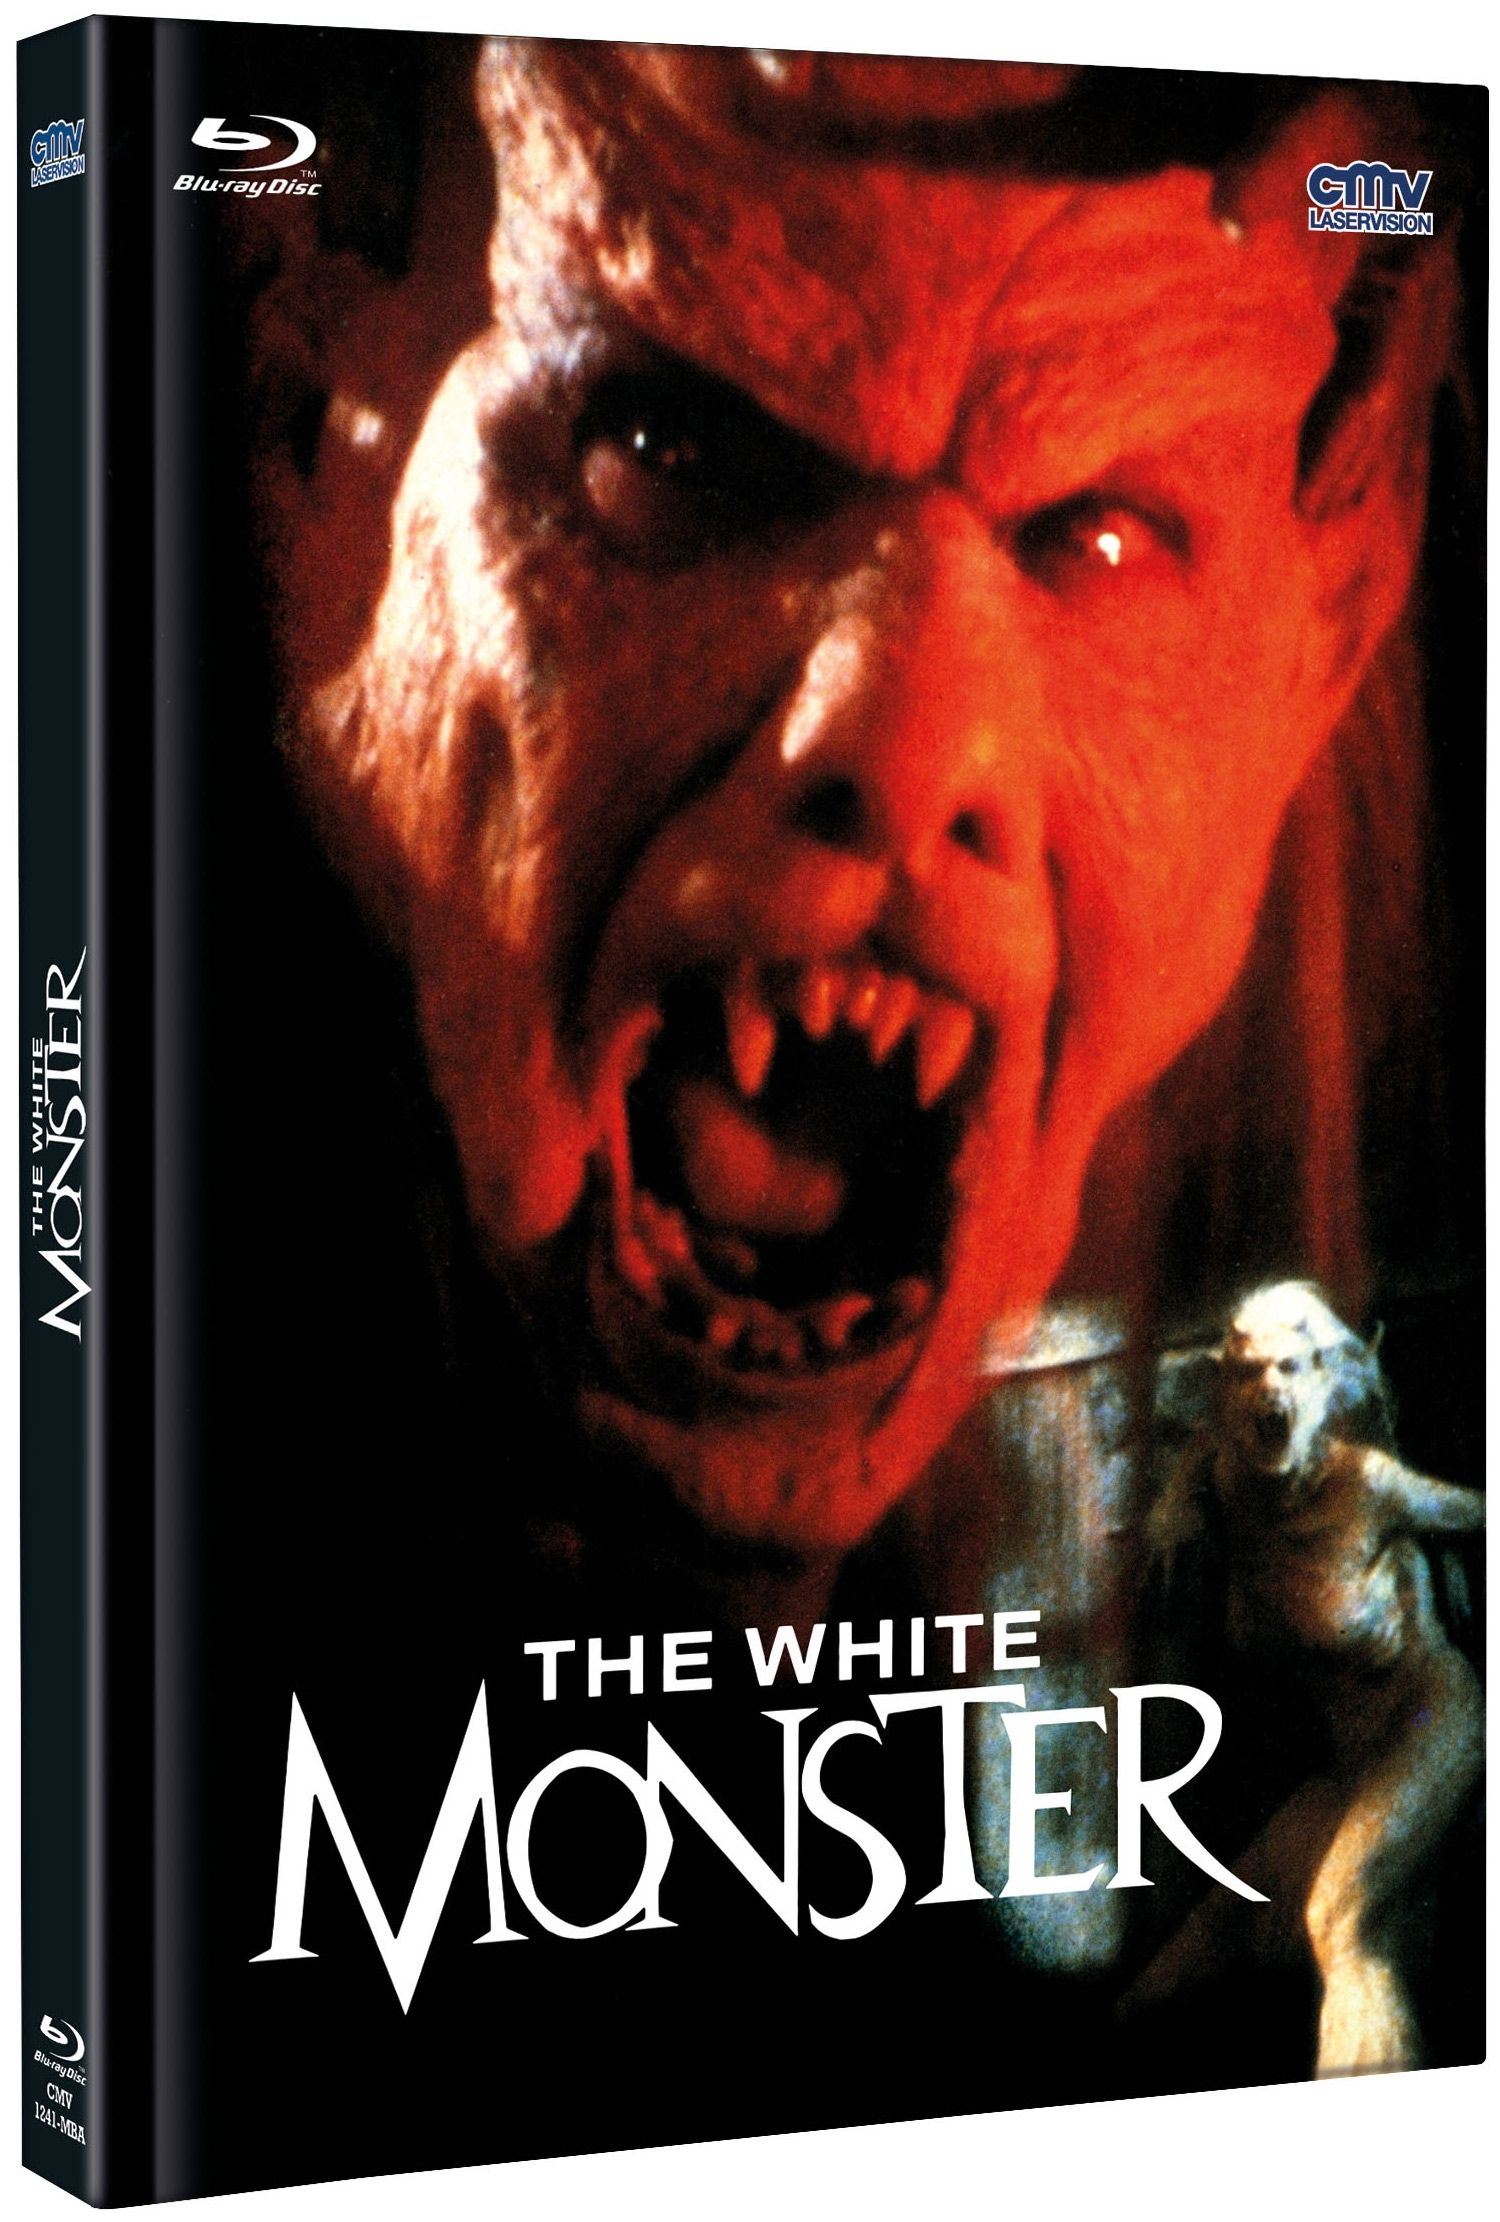 White Monster, The (Lim. Uncut Mediabook - Cover A) (DVD + BLURAY)